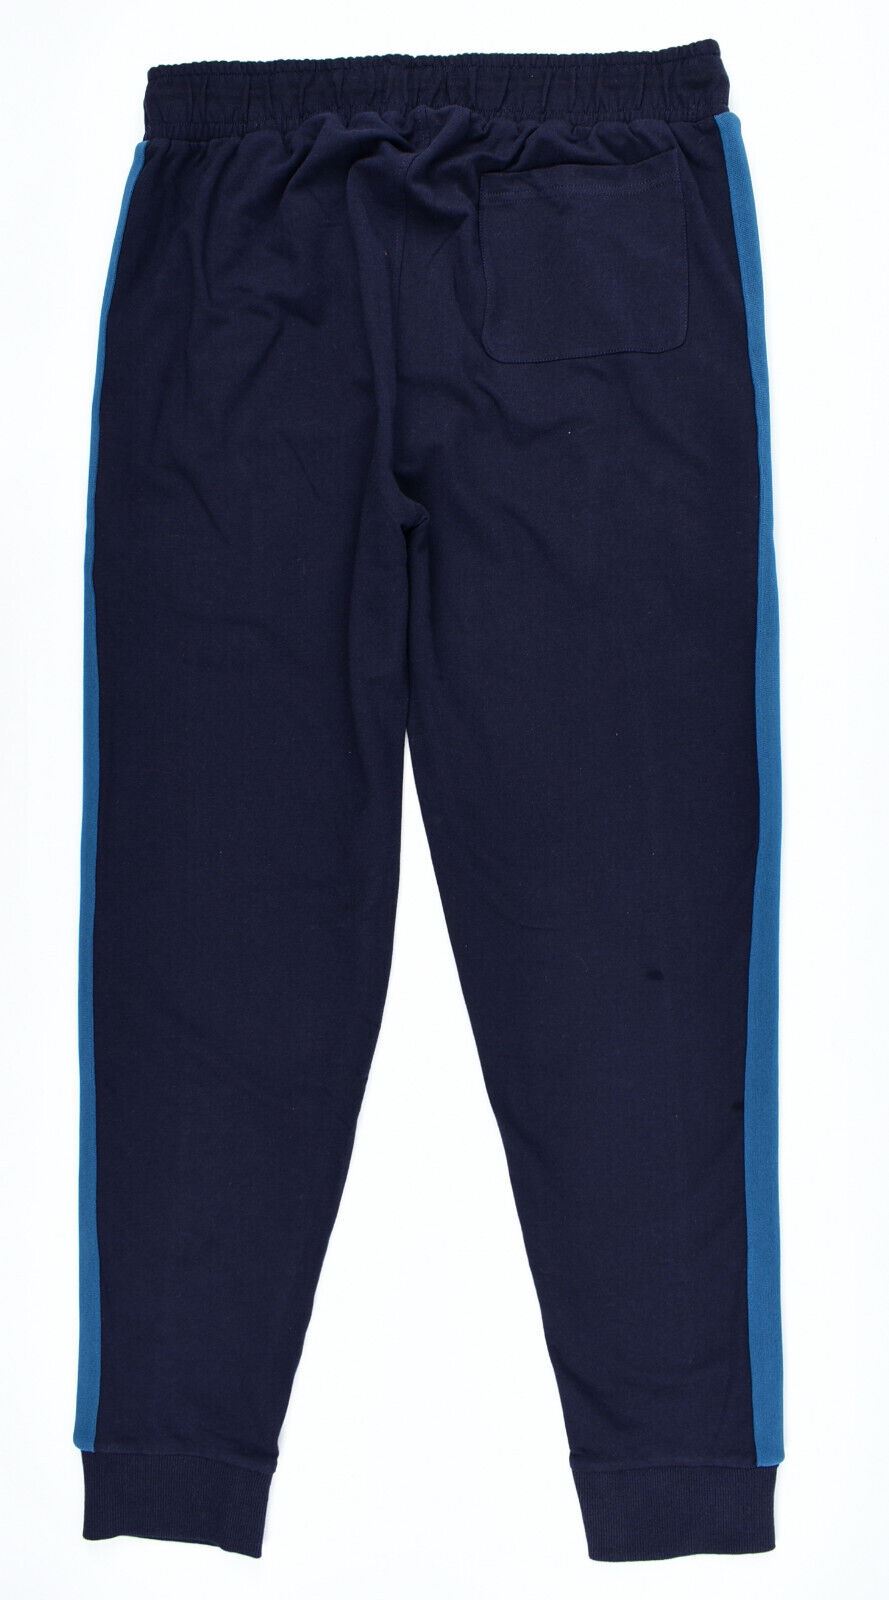 TED BAKER Men's French Terry Joggers, Lounging Pants, Navy Blue, Ted size 5 /XL